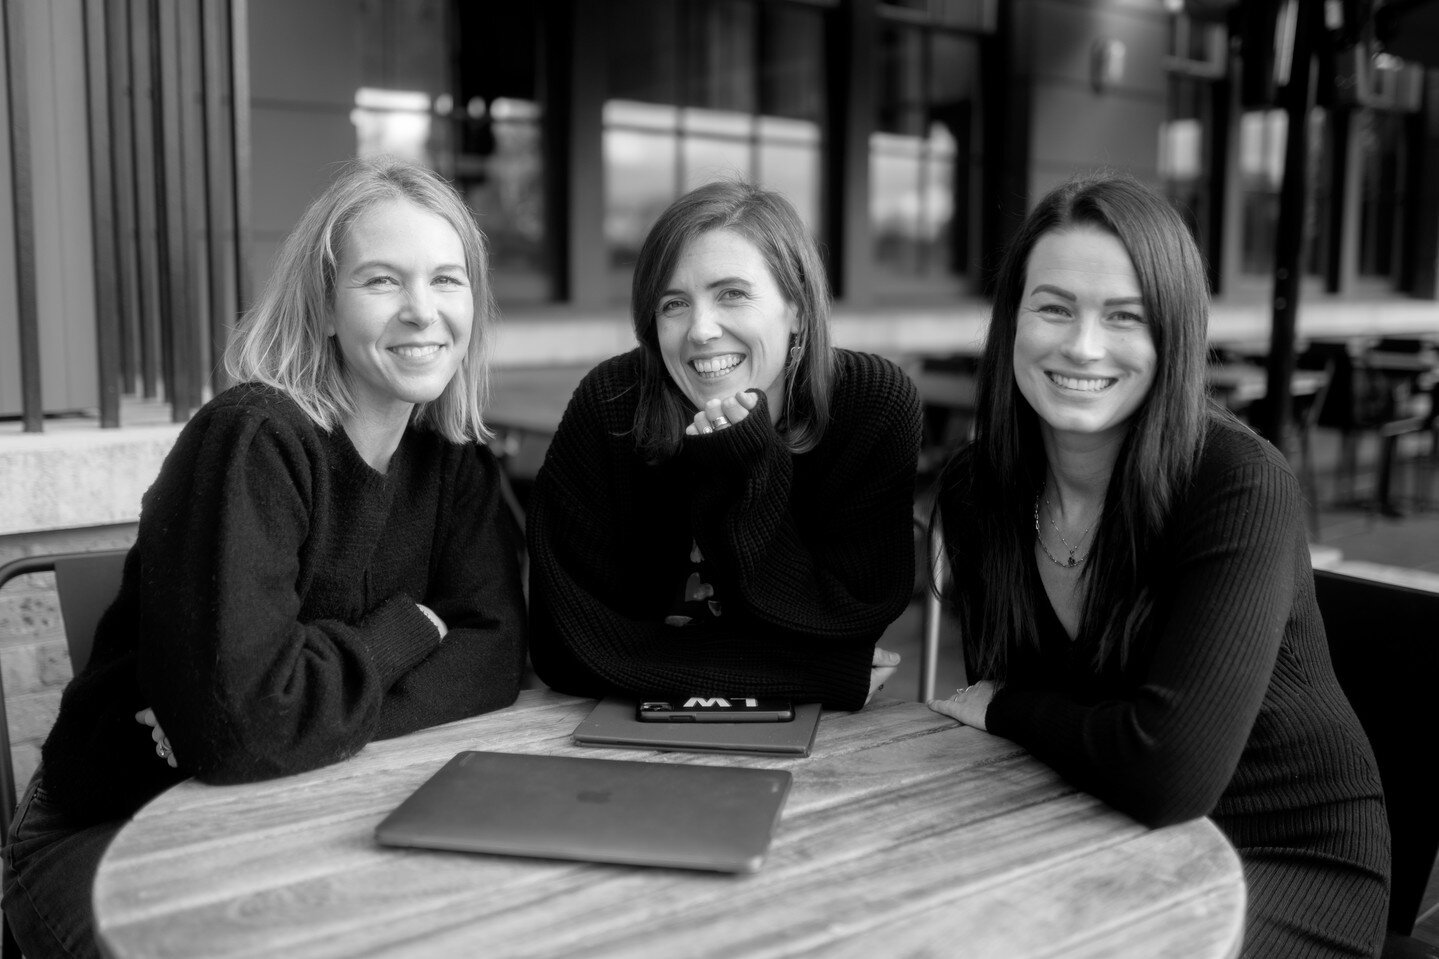 MEET THE FACES BEHIND LA LISTA ⚡

We're Emily, Lucy &amp; Beth (L-R) and we're on a MISSION to make planning a wedding in Italy a calm and enjoyable experience for couples all around the world. 🌎

We know that planning a destination wedding can be h